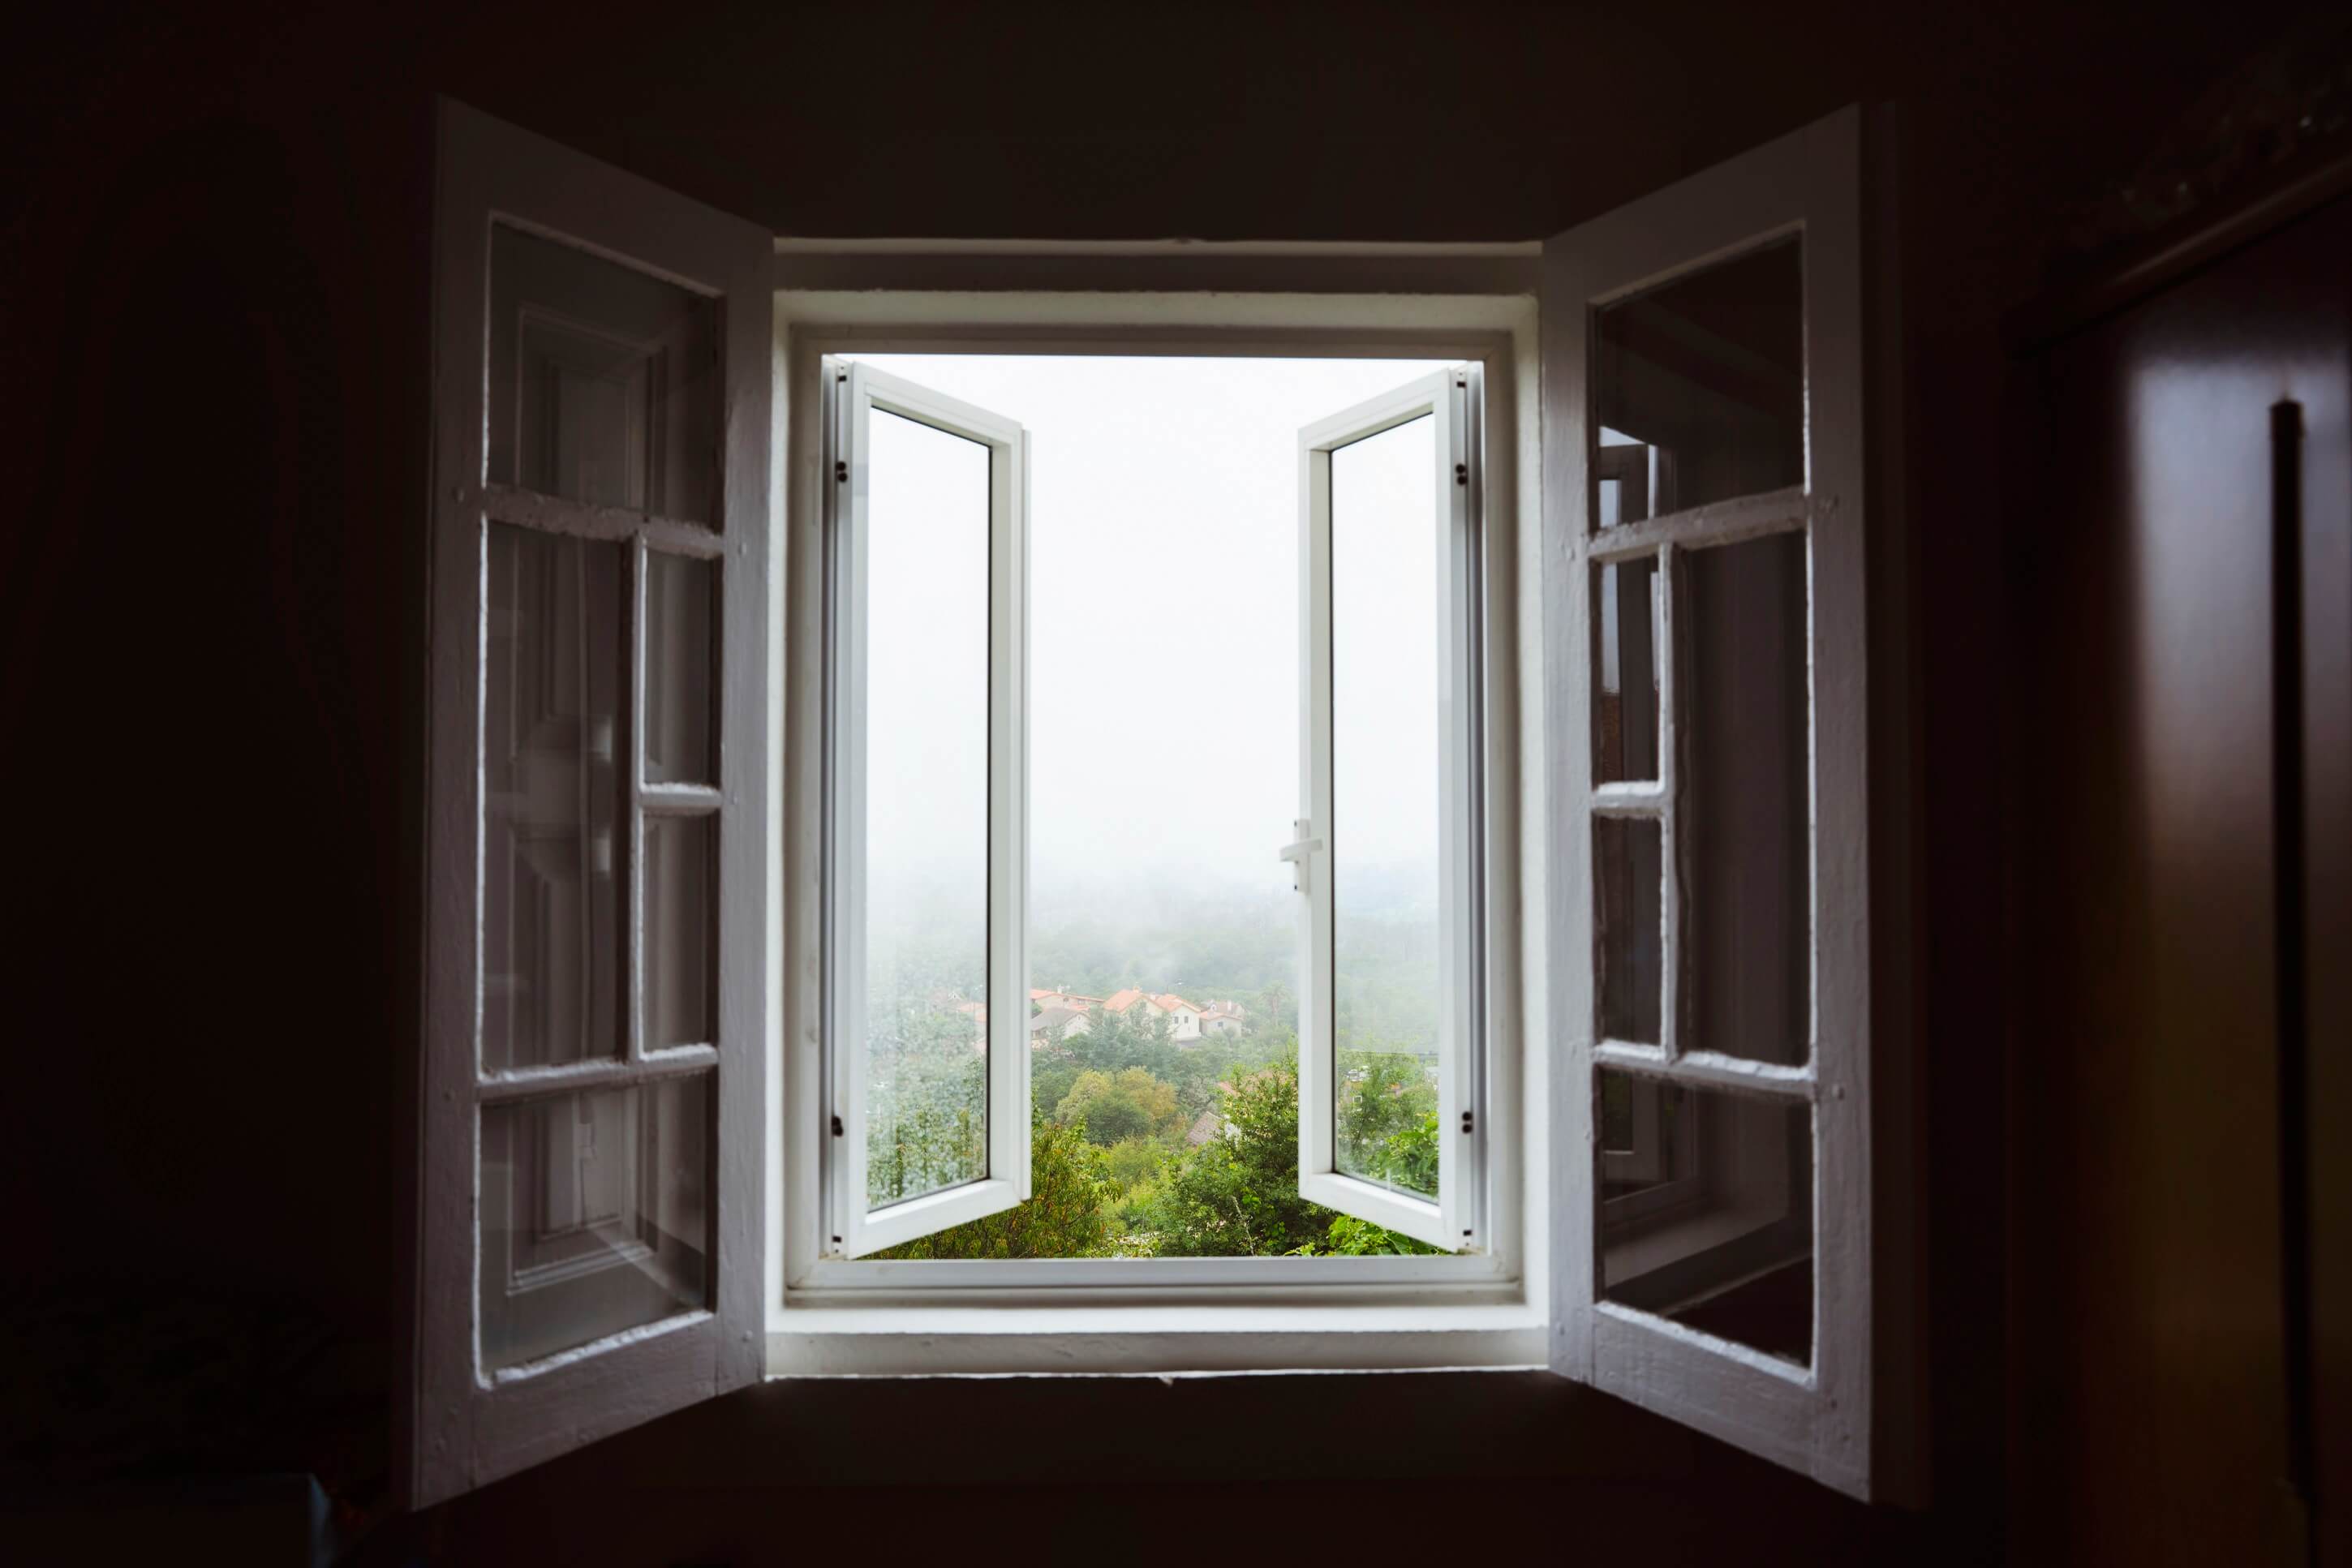 wide-open-window-with-amazing-countryside-view-foggy-day-stay-home-concept-scenery-view-from-house-travel-spain-holidays-concept-open-window-air-room-ventilate-your-house